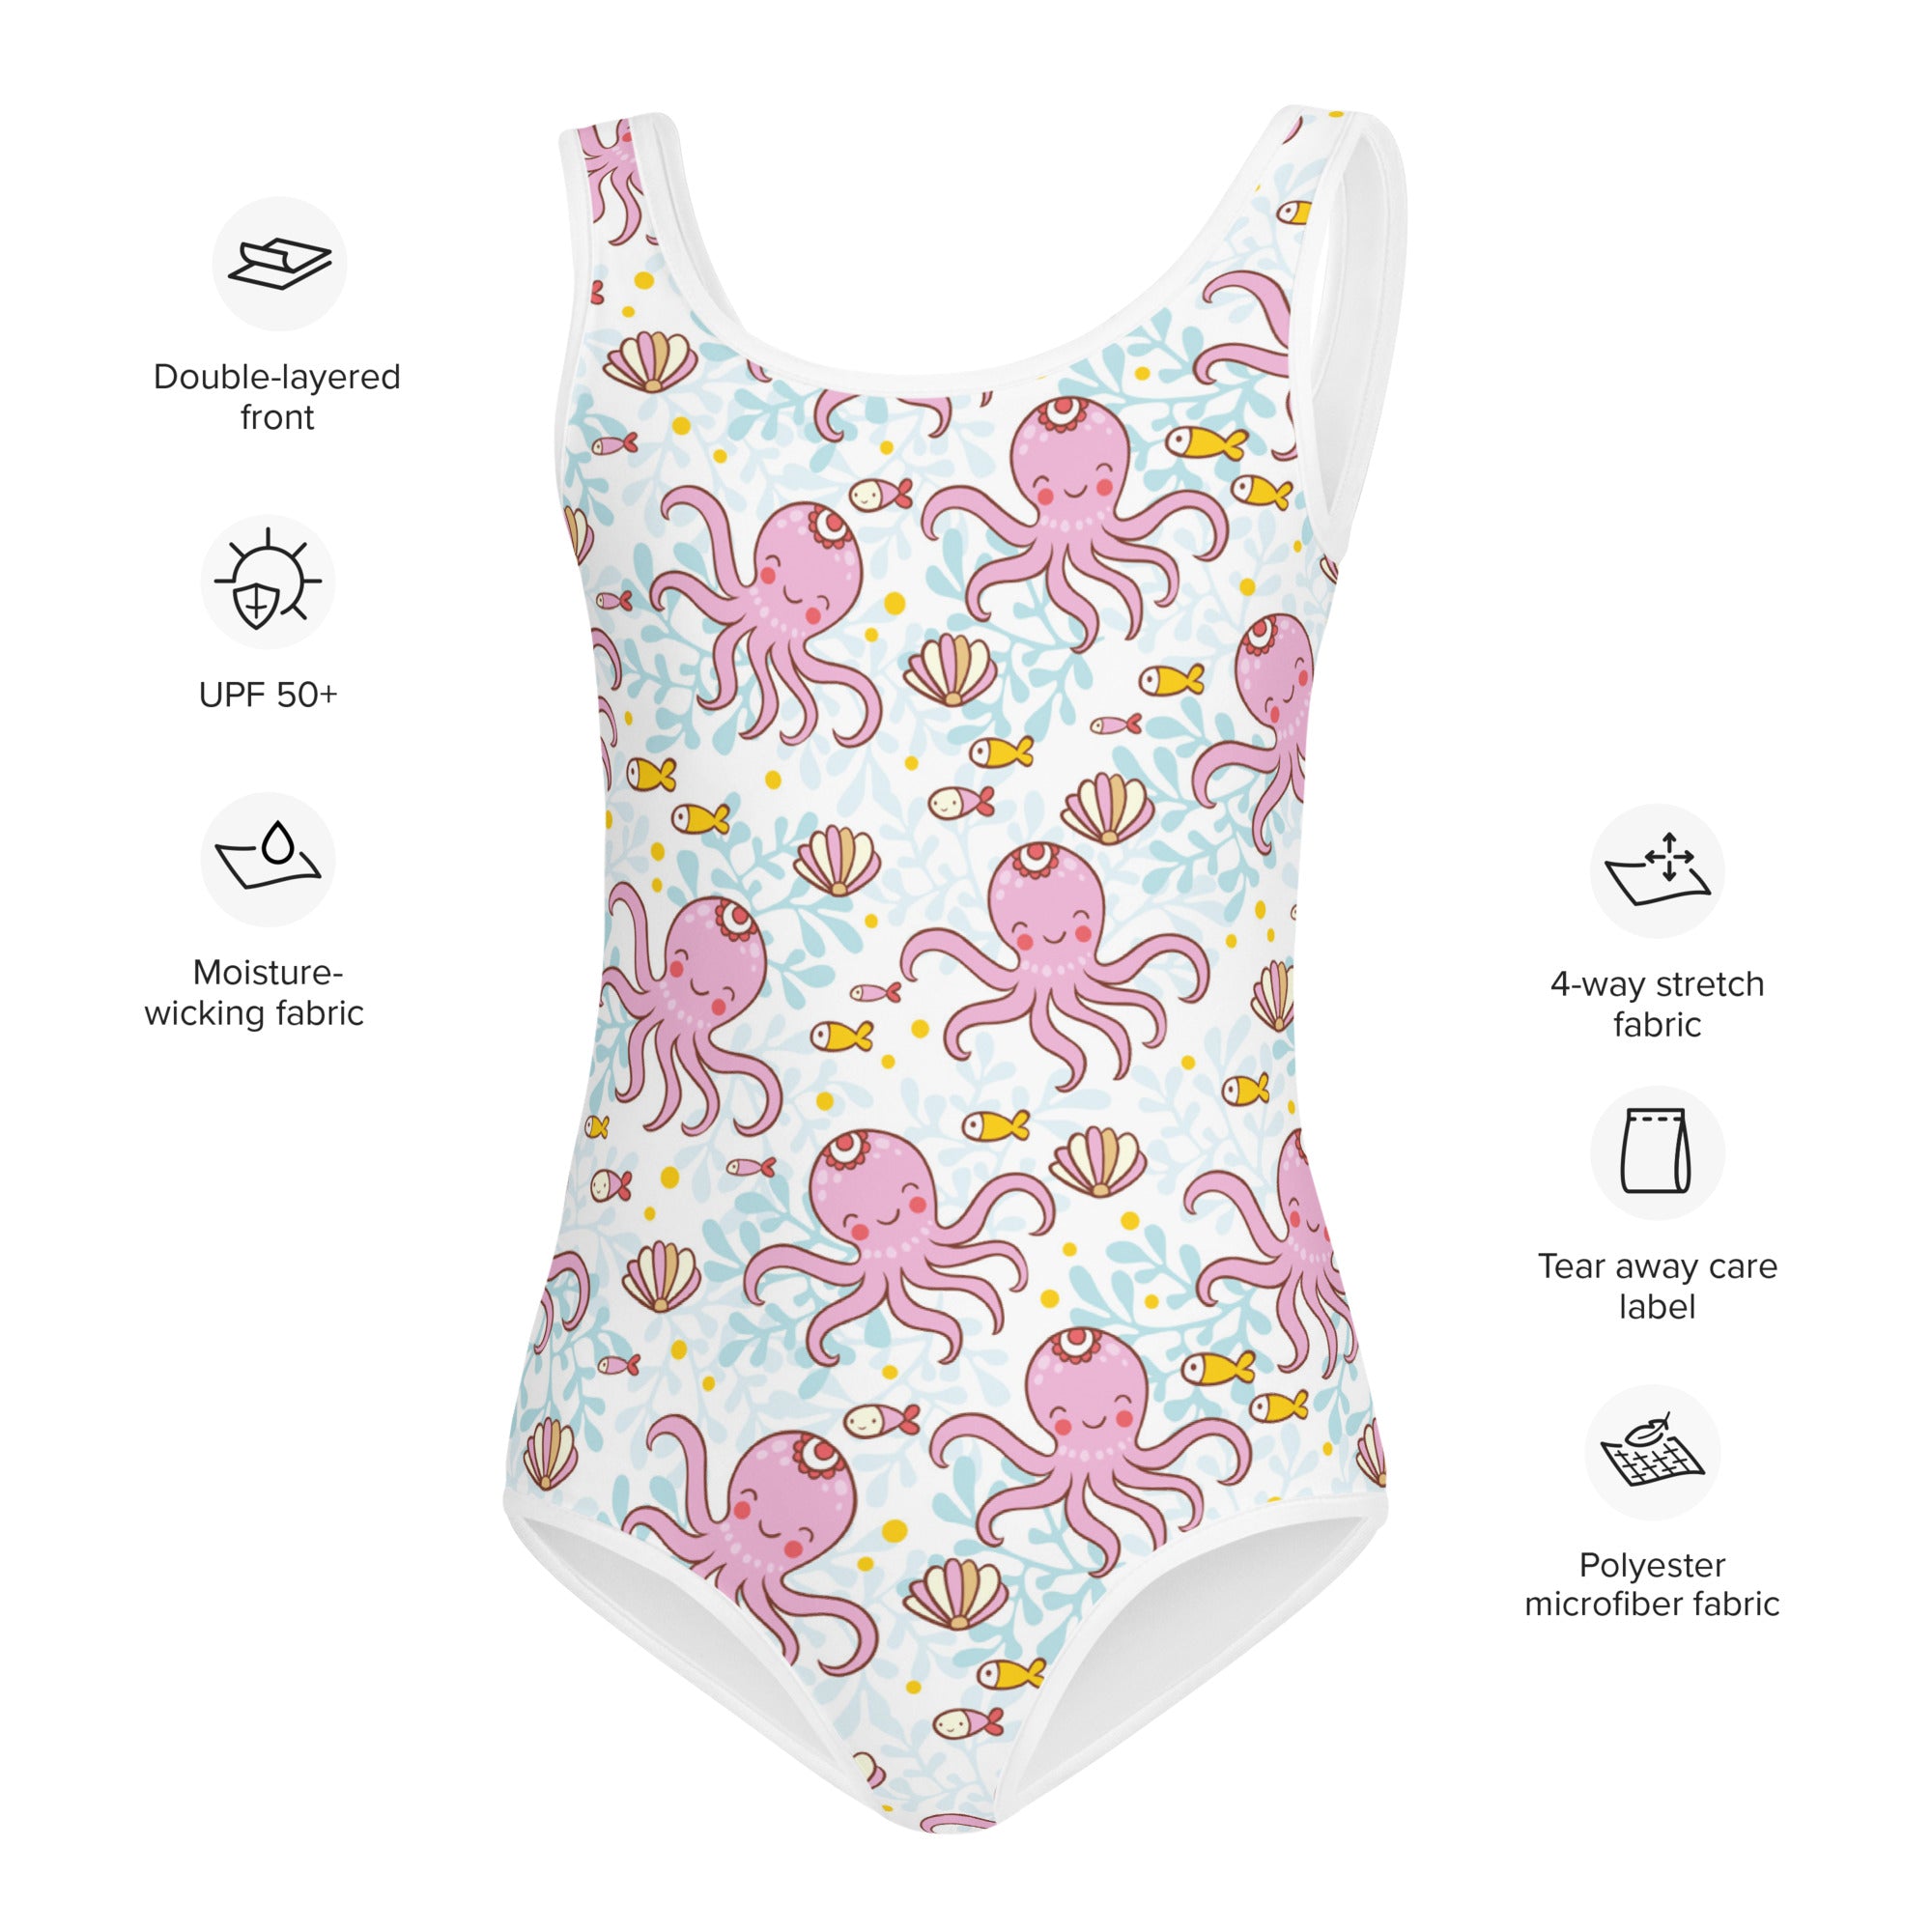 Kids' Printed One-Piece Swimsuit - Pinky the Octopus's Playground